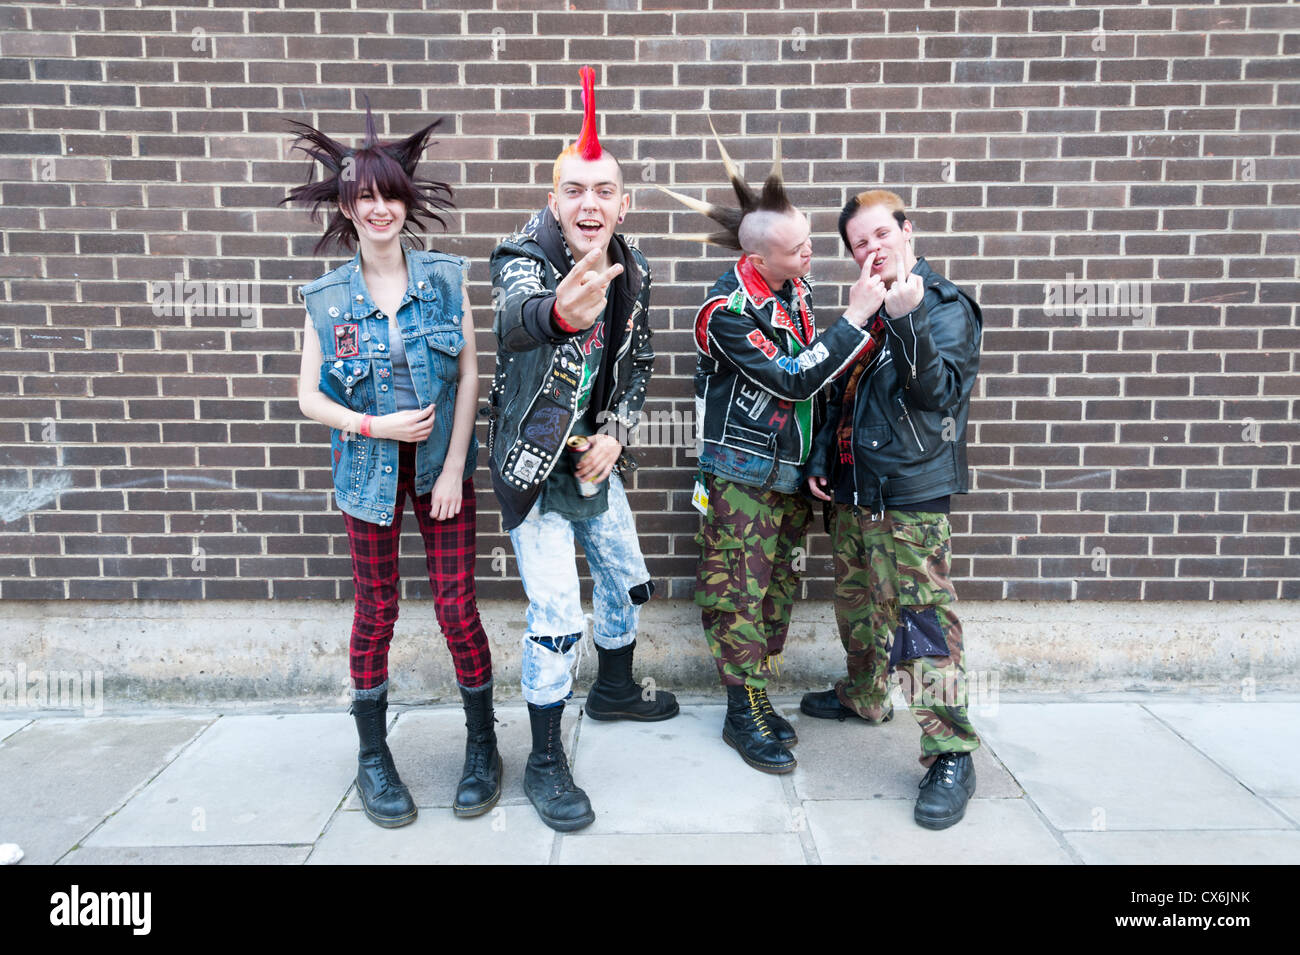 Punk rockers pose for a portrait against a brick wall and pull interesting faces Stock Photo